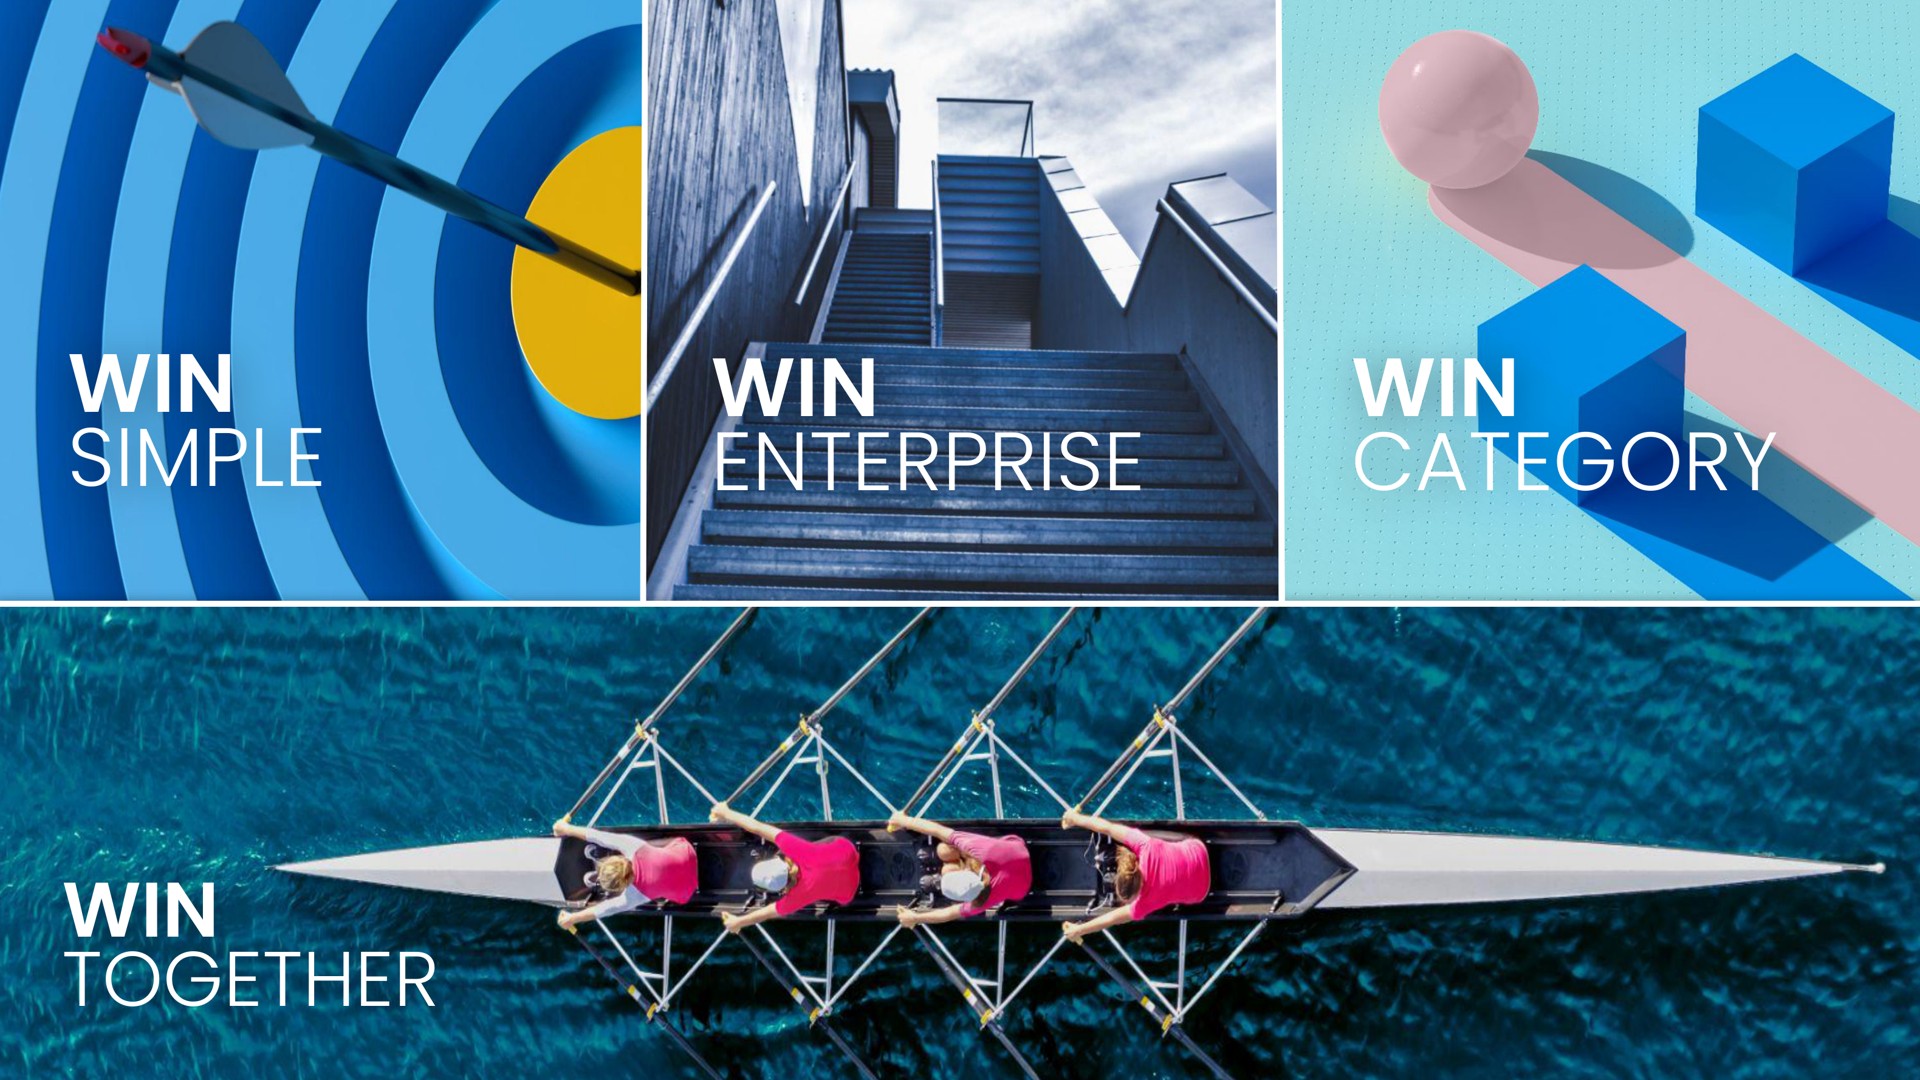 win category win simple win together win enterprise win category win together a | Amplitude